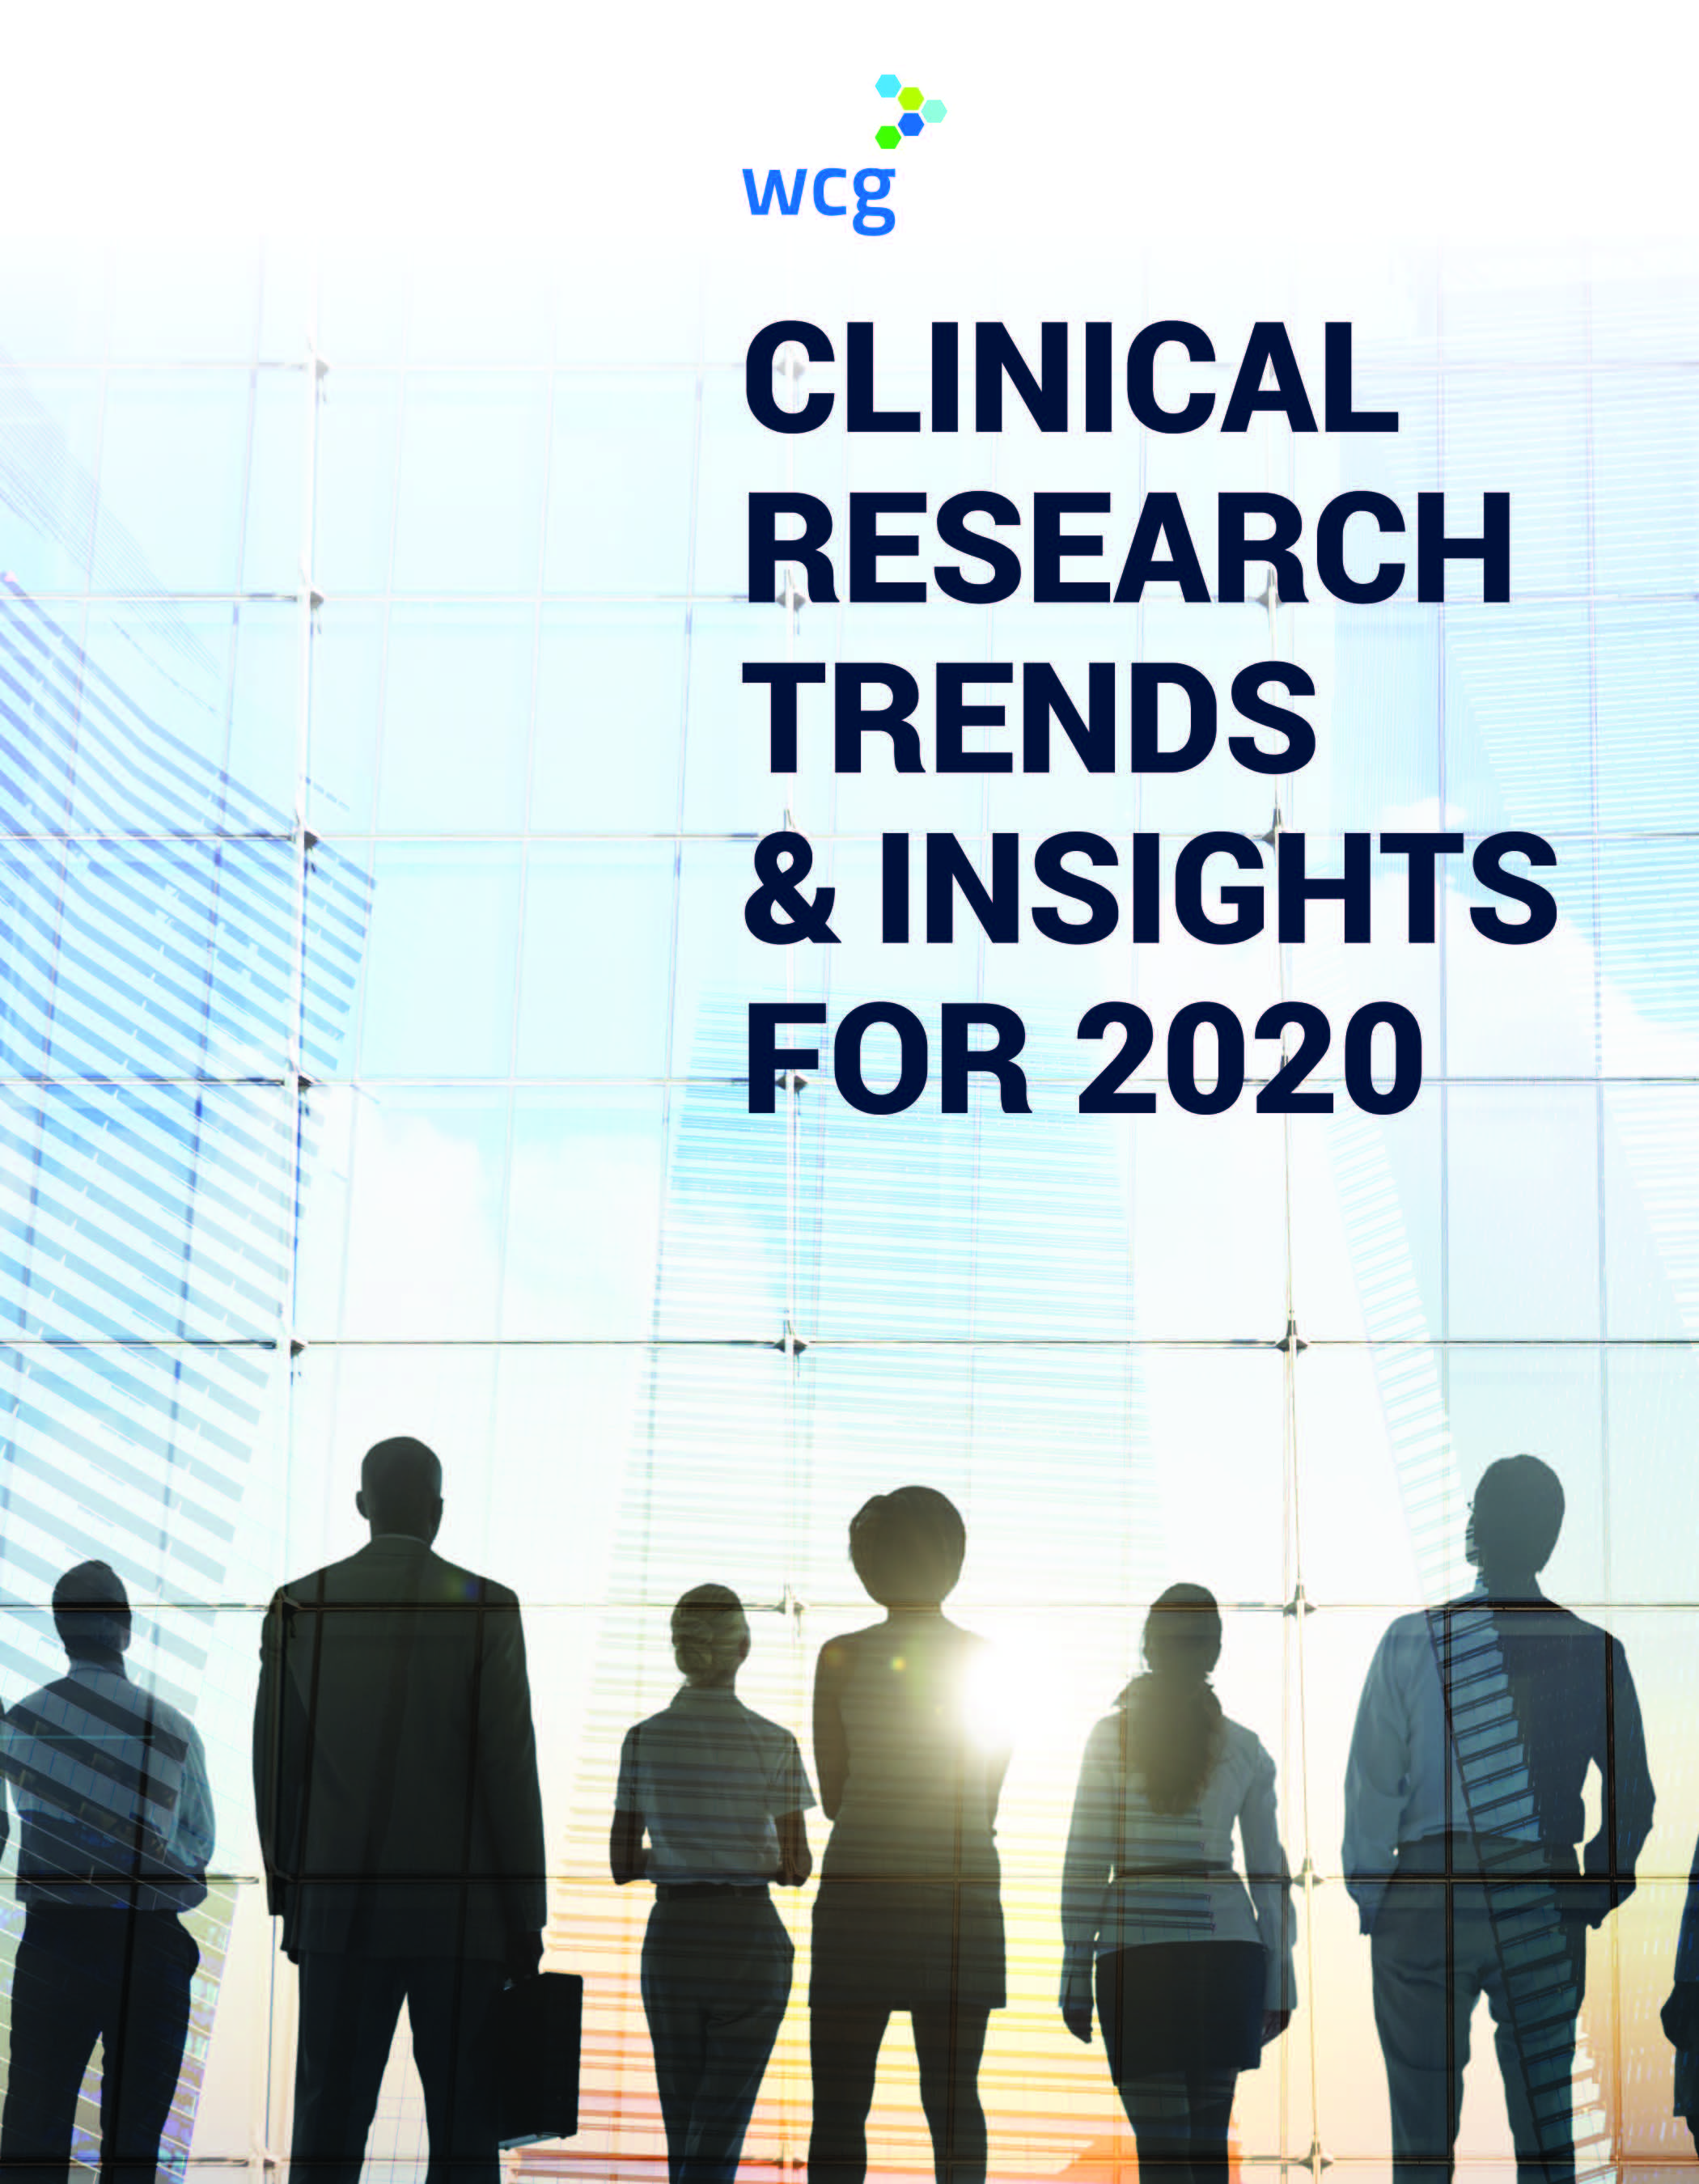 Clinical Research Trends & Insights for 2020